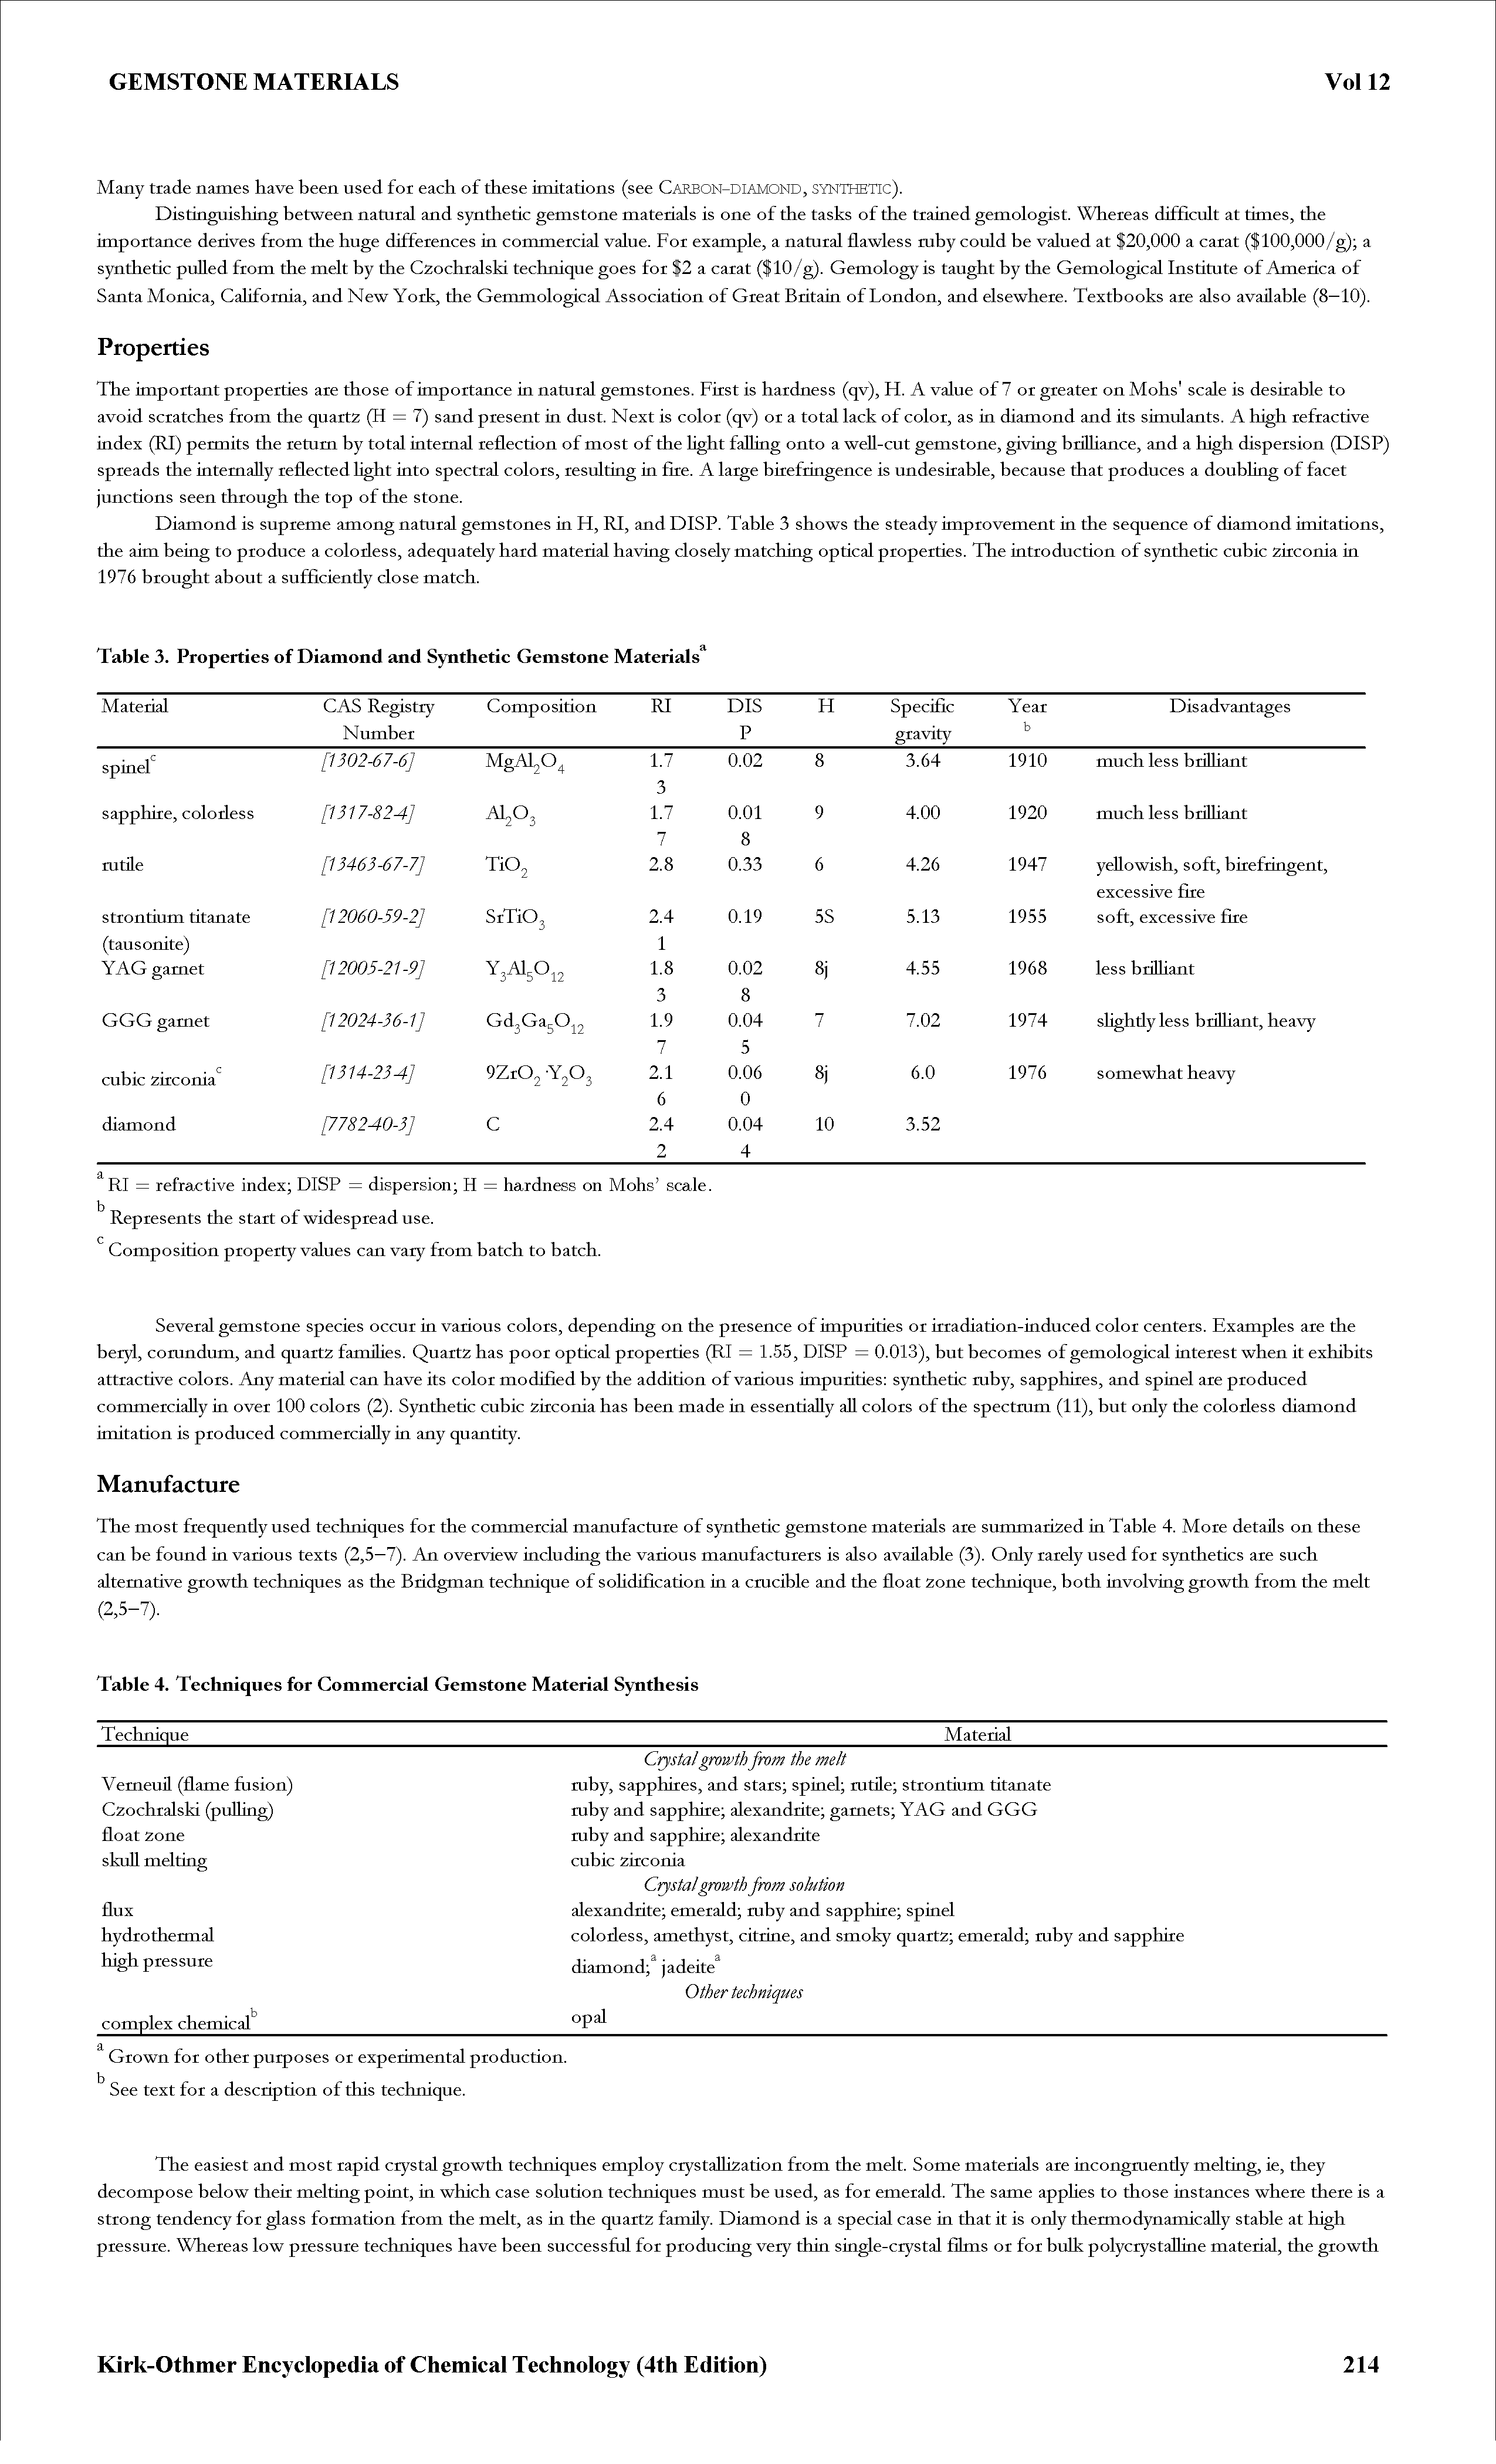 Table 4. Techniques for Commercial Gemstone Material Synthesis...